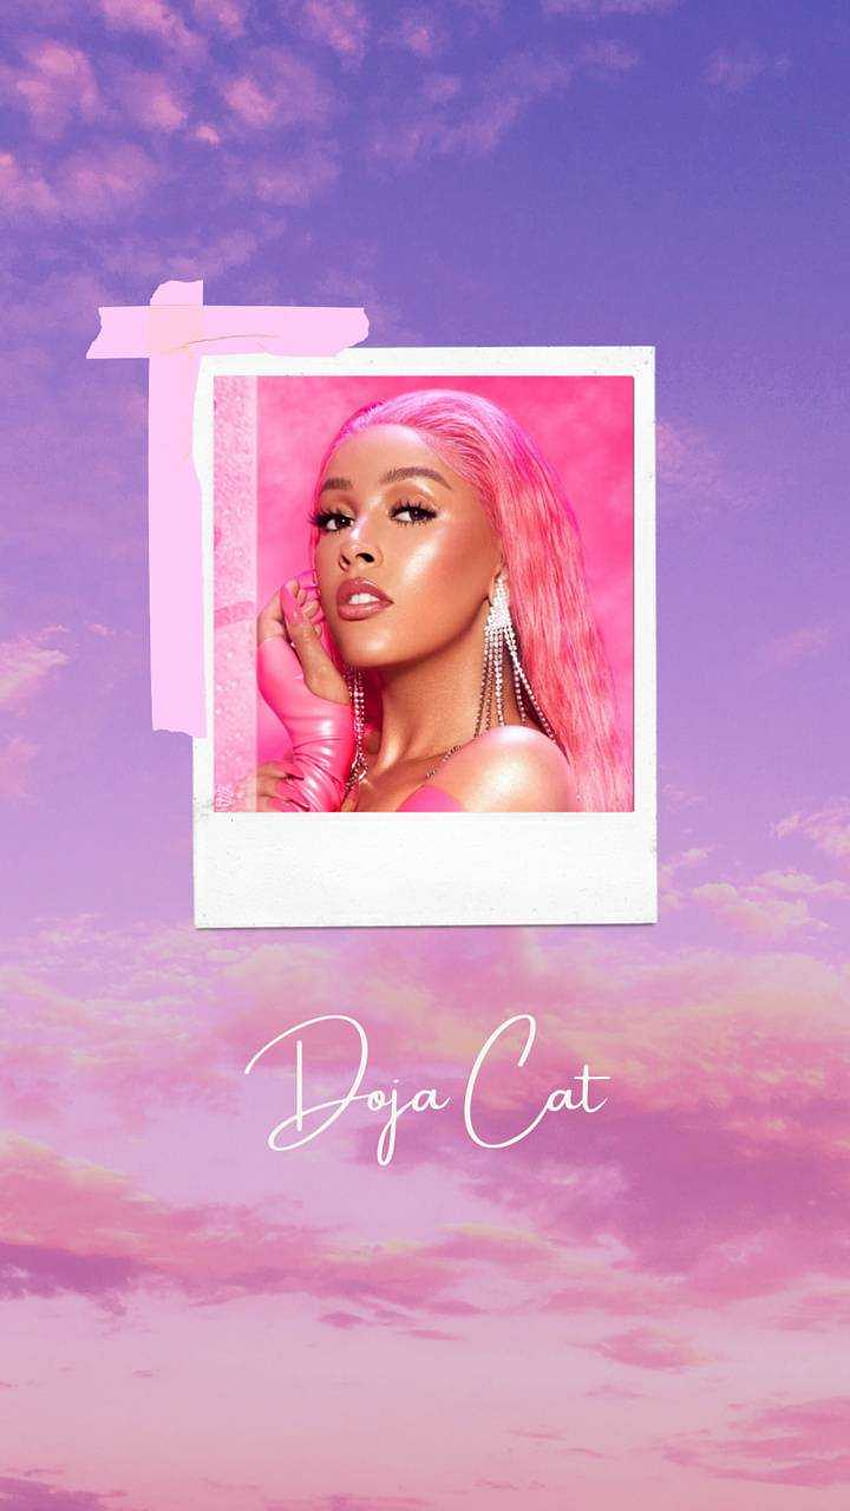 Heres cute wallpaper for Doja cat I dont own any of these images   Cat background Cat collage Cute wallpapers